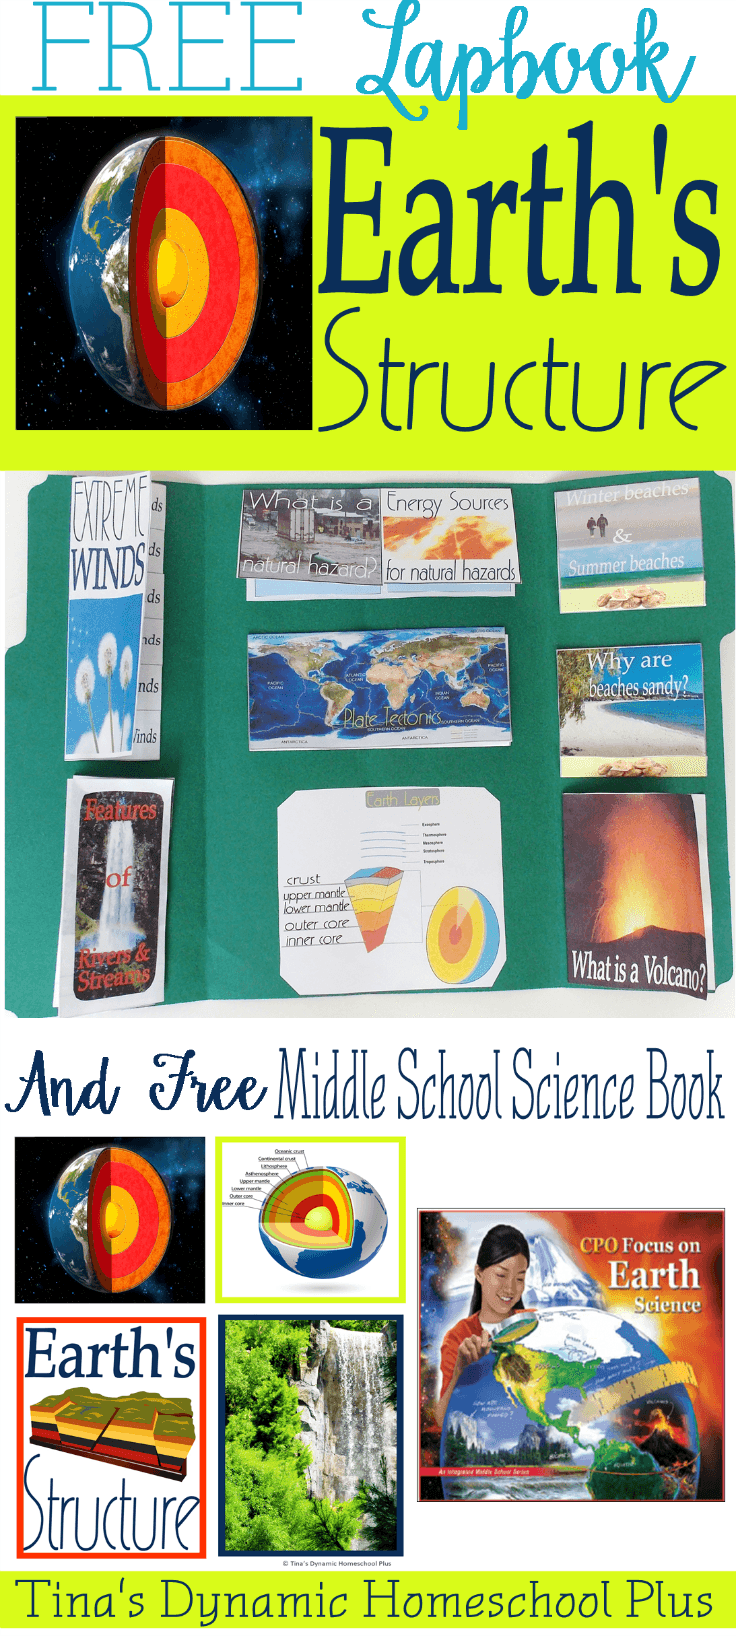 Free Earth Structure Lapbook & Middle School Science Book @ Tina's Dynamic Homeschool Plus